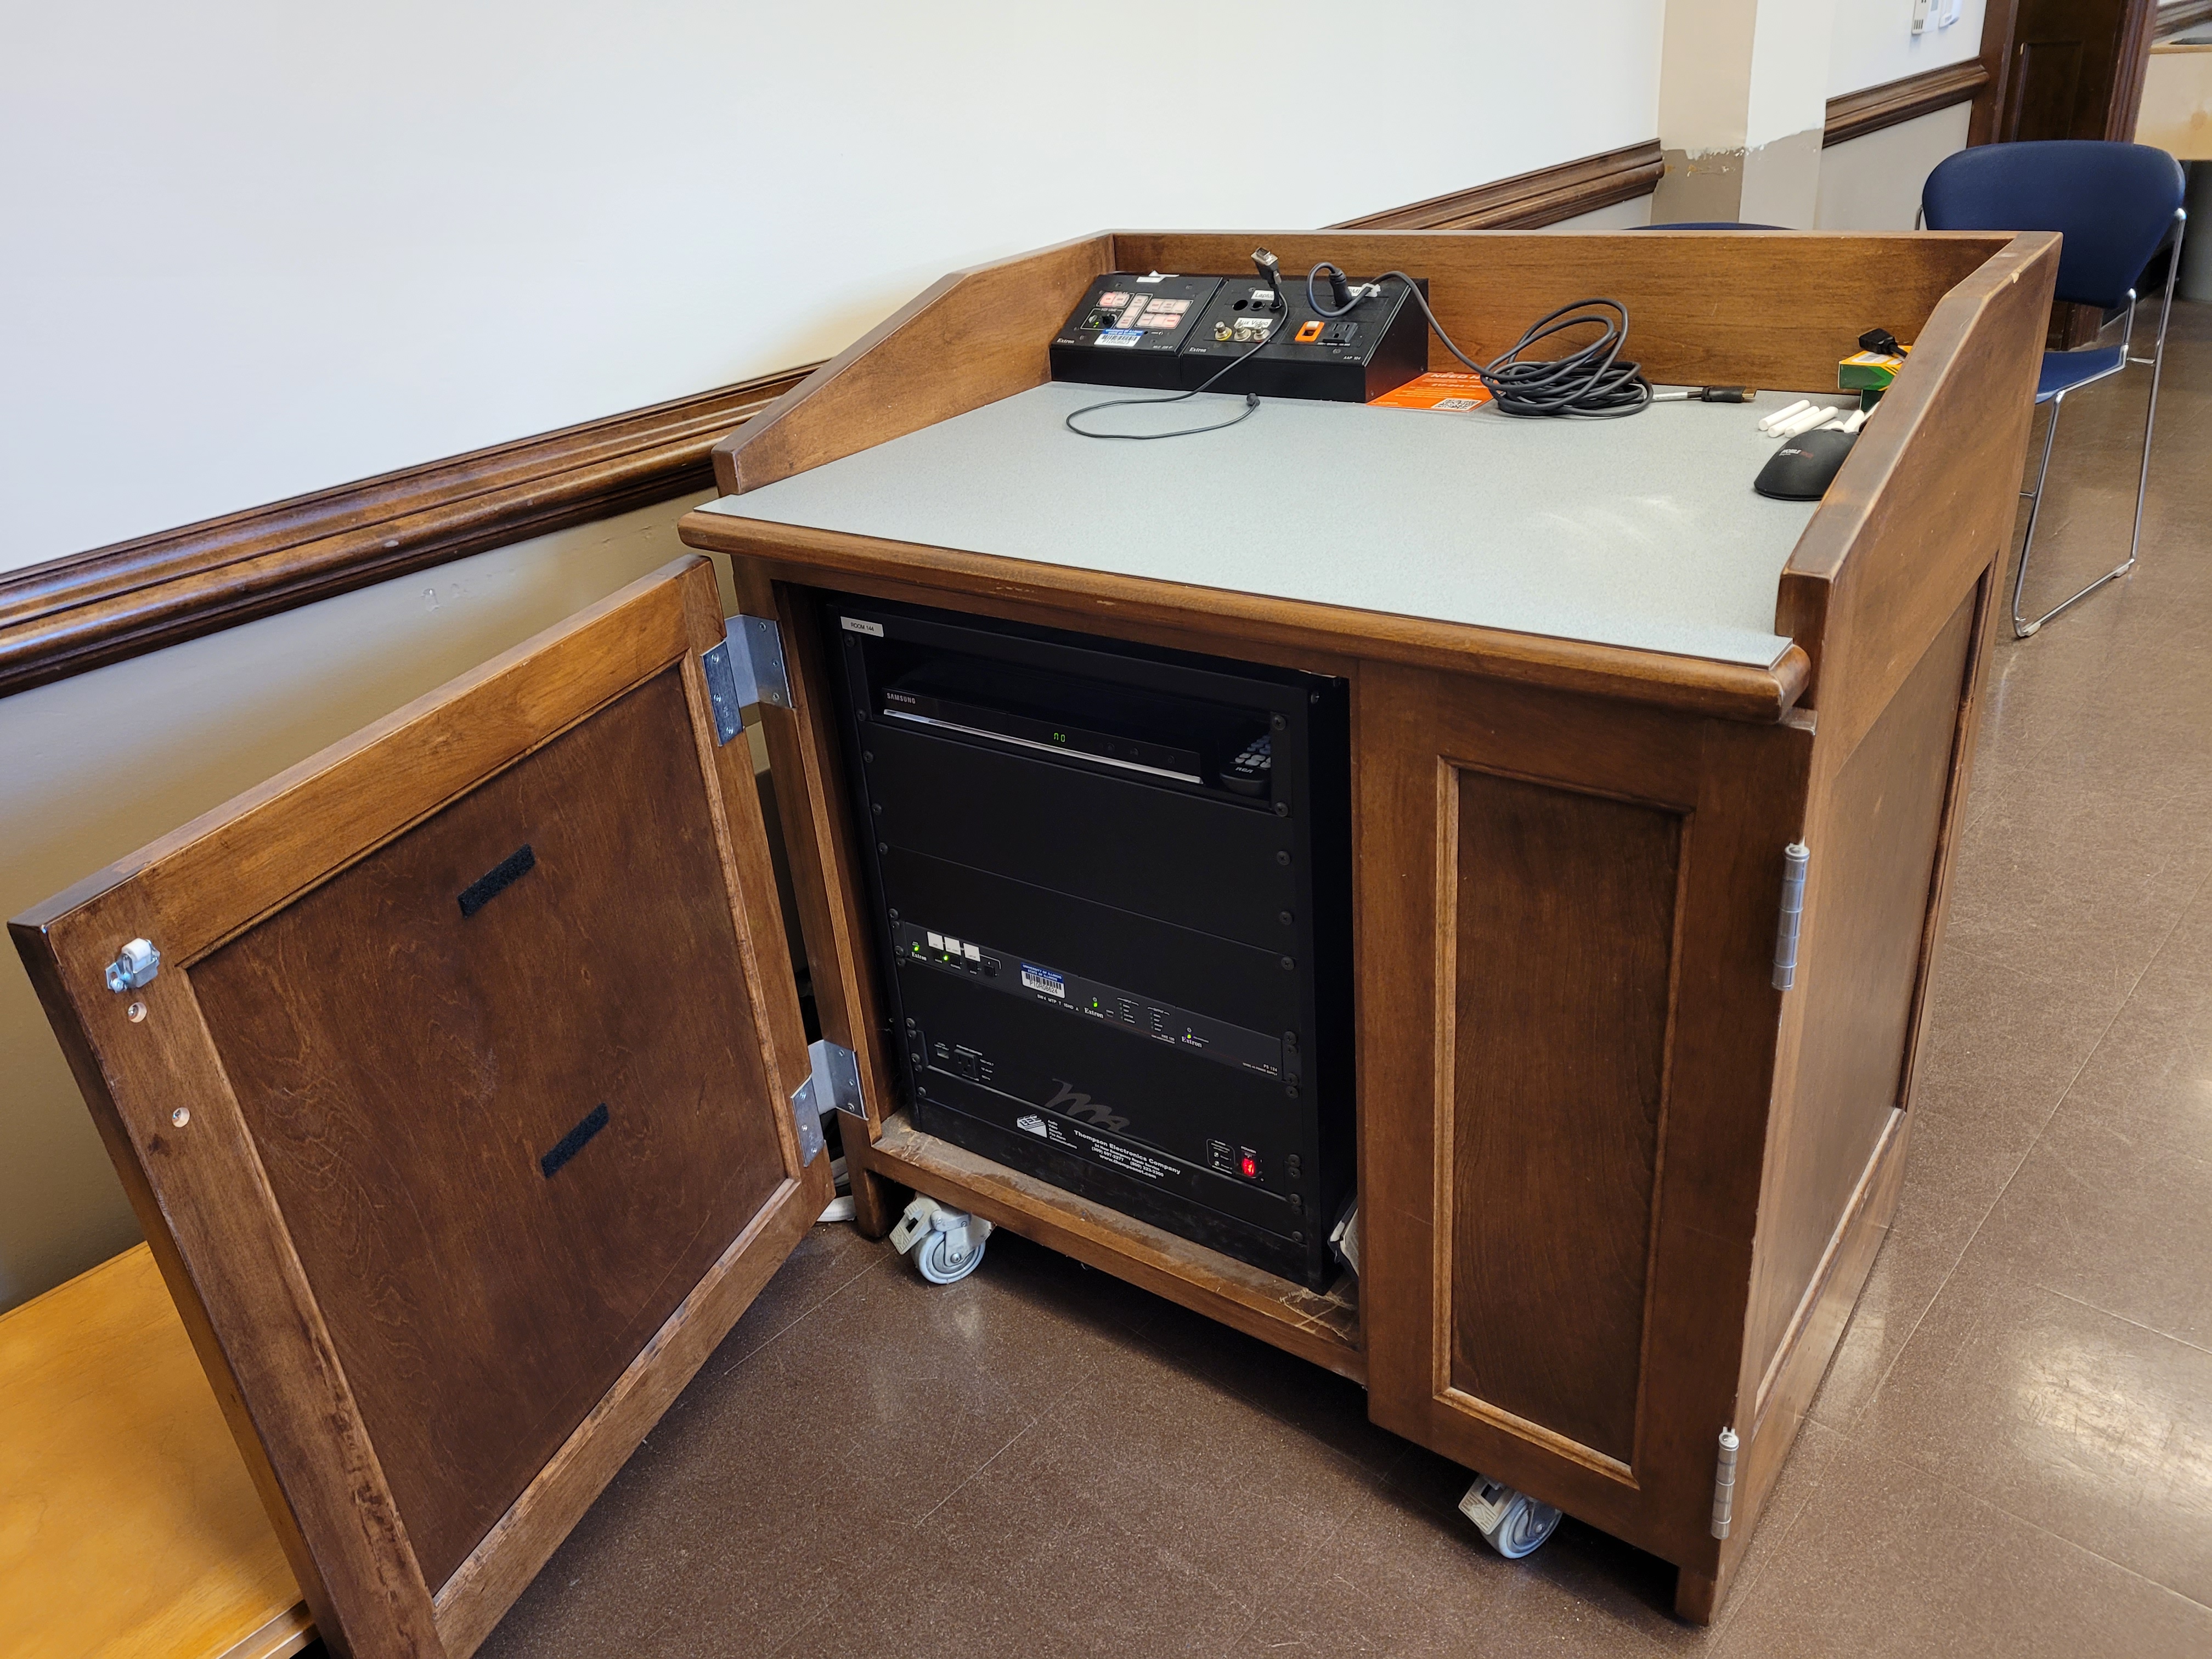 A view of the open cabinet with  HDMI input, a push button controller, and audio visual rack